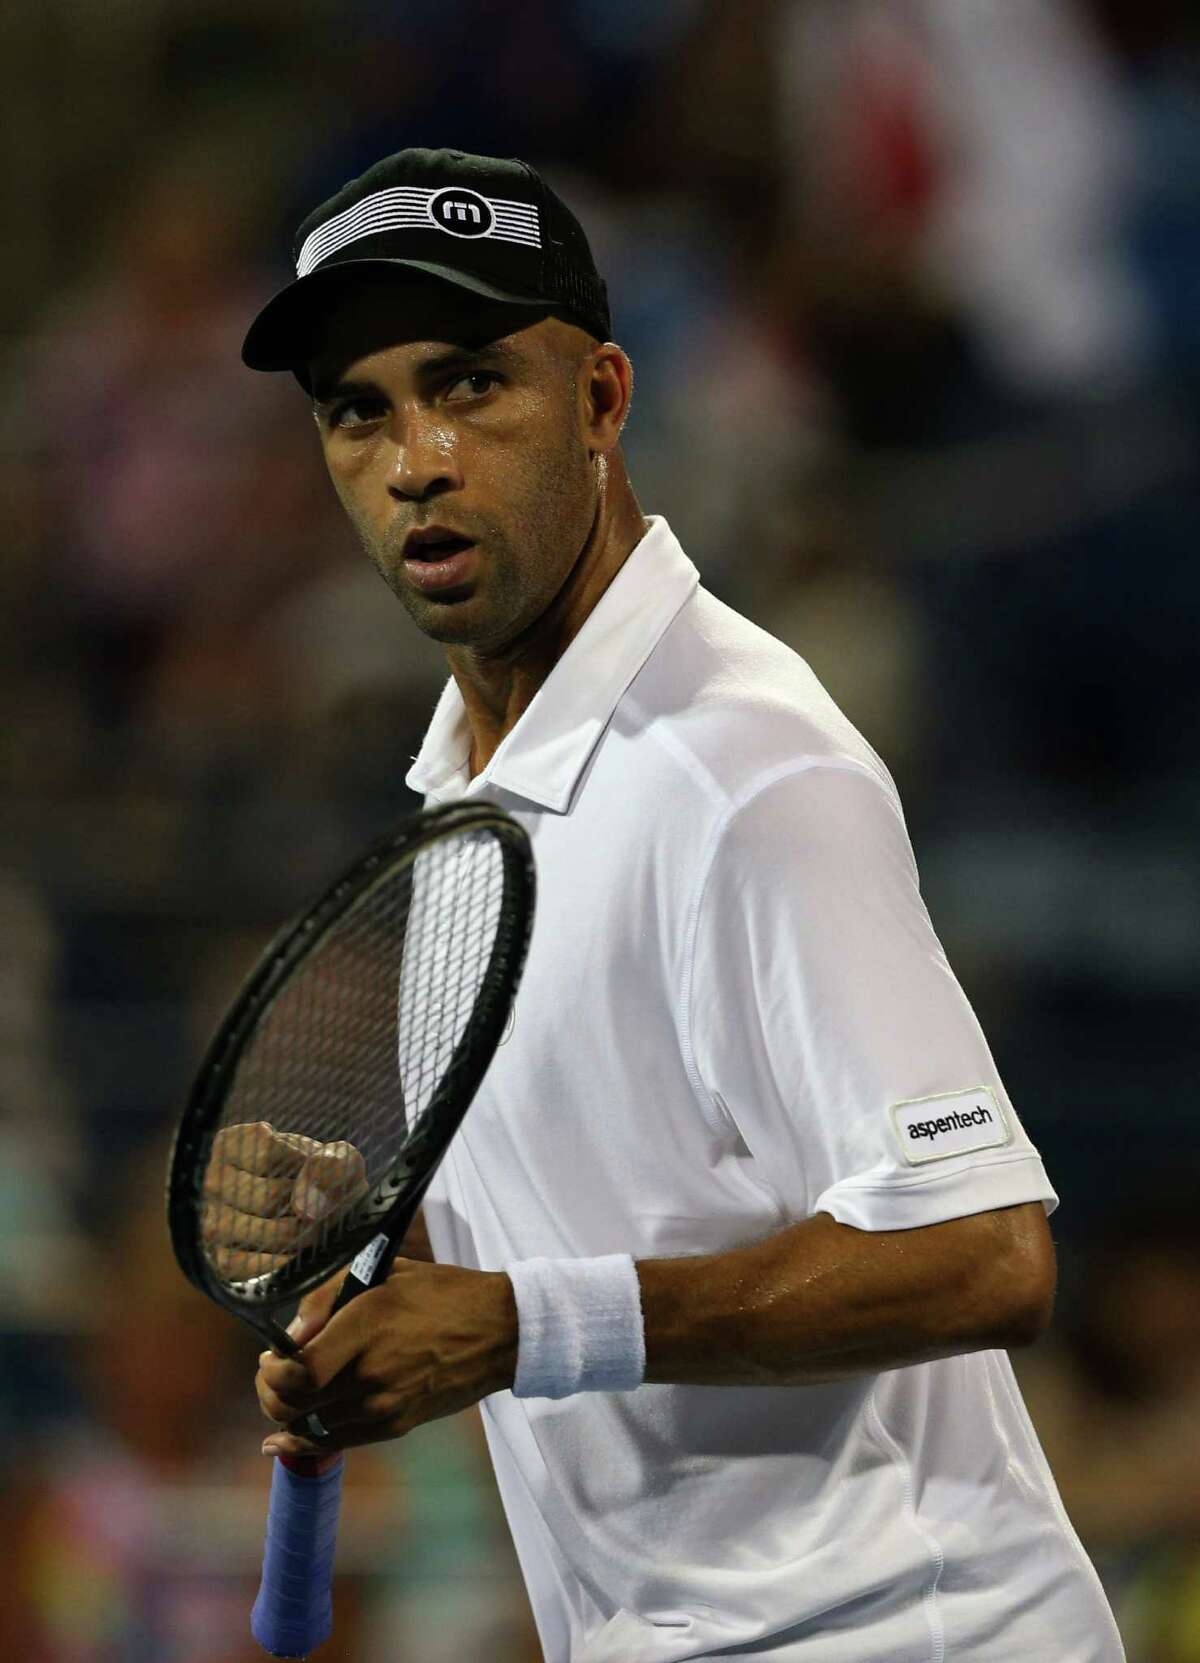 James Blake of the United States at the 2013 US Open at USTA Billie Jean King National Tennis Center on August 28, 2013